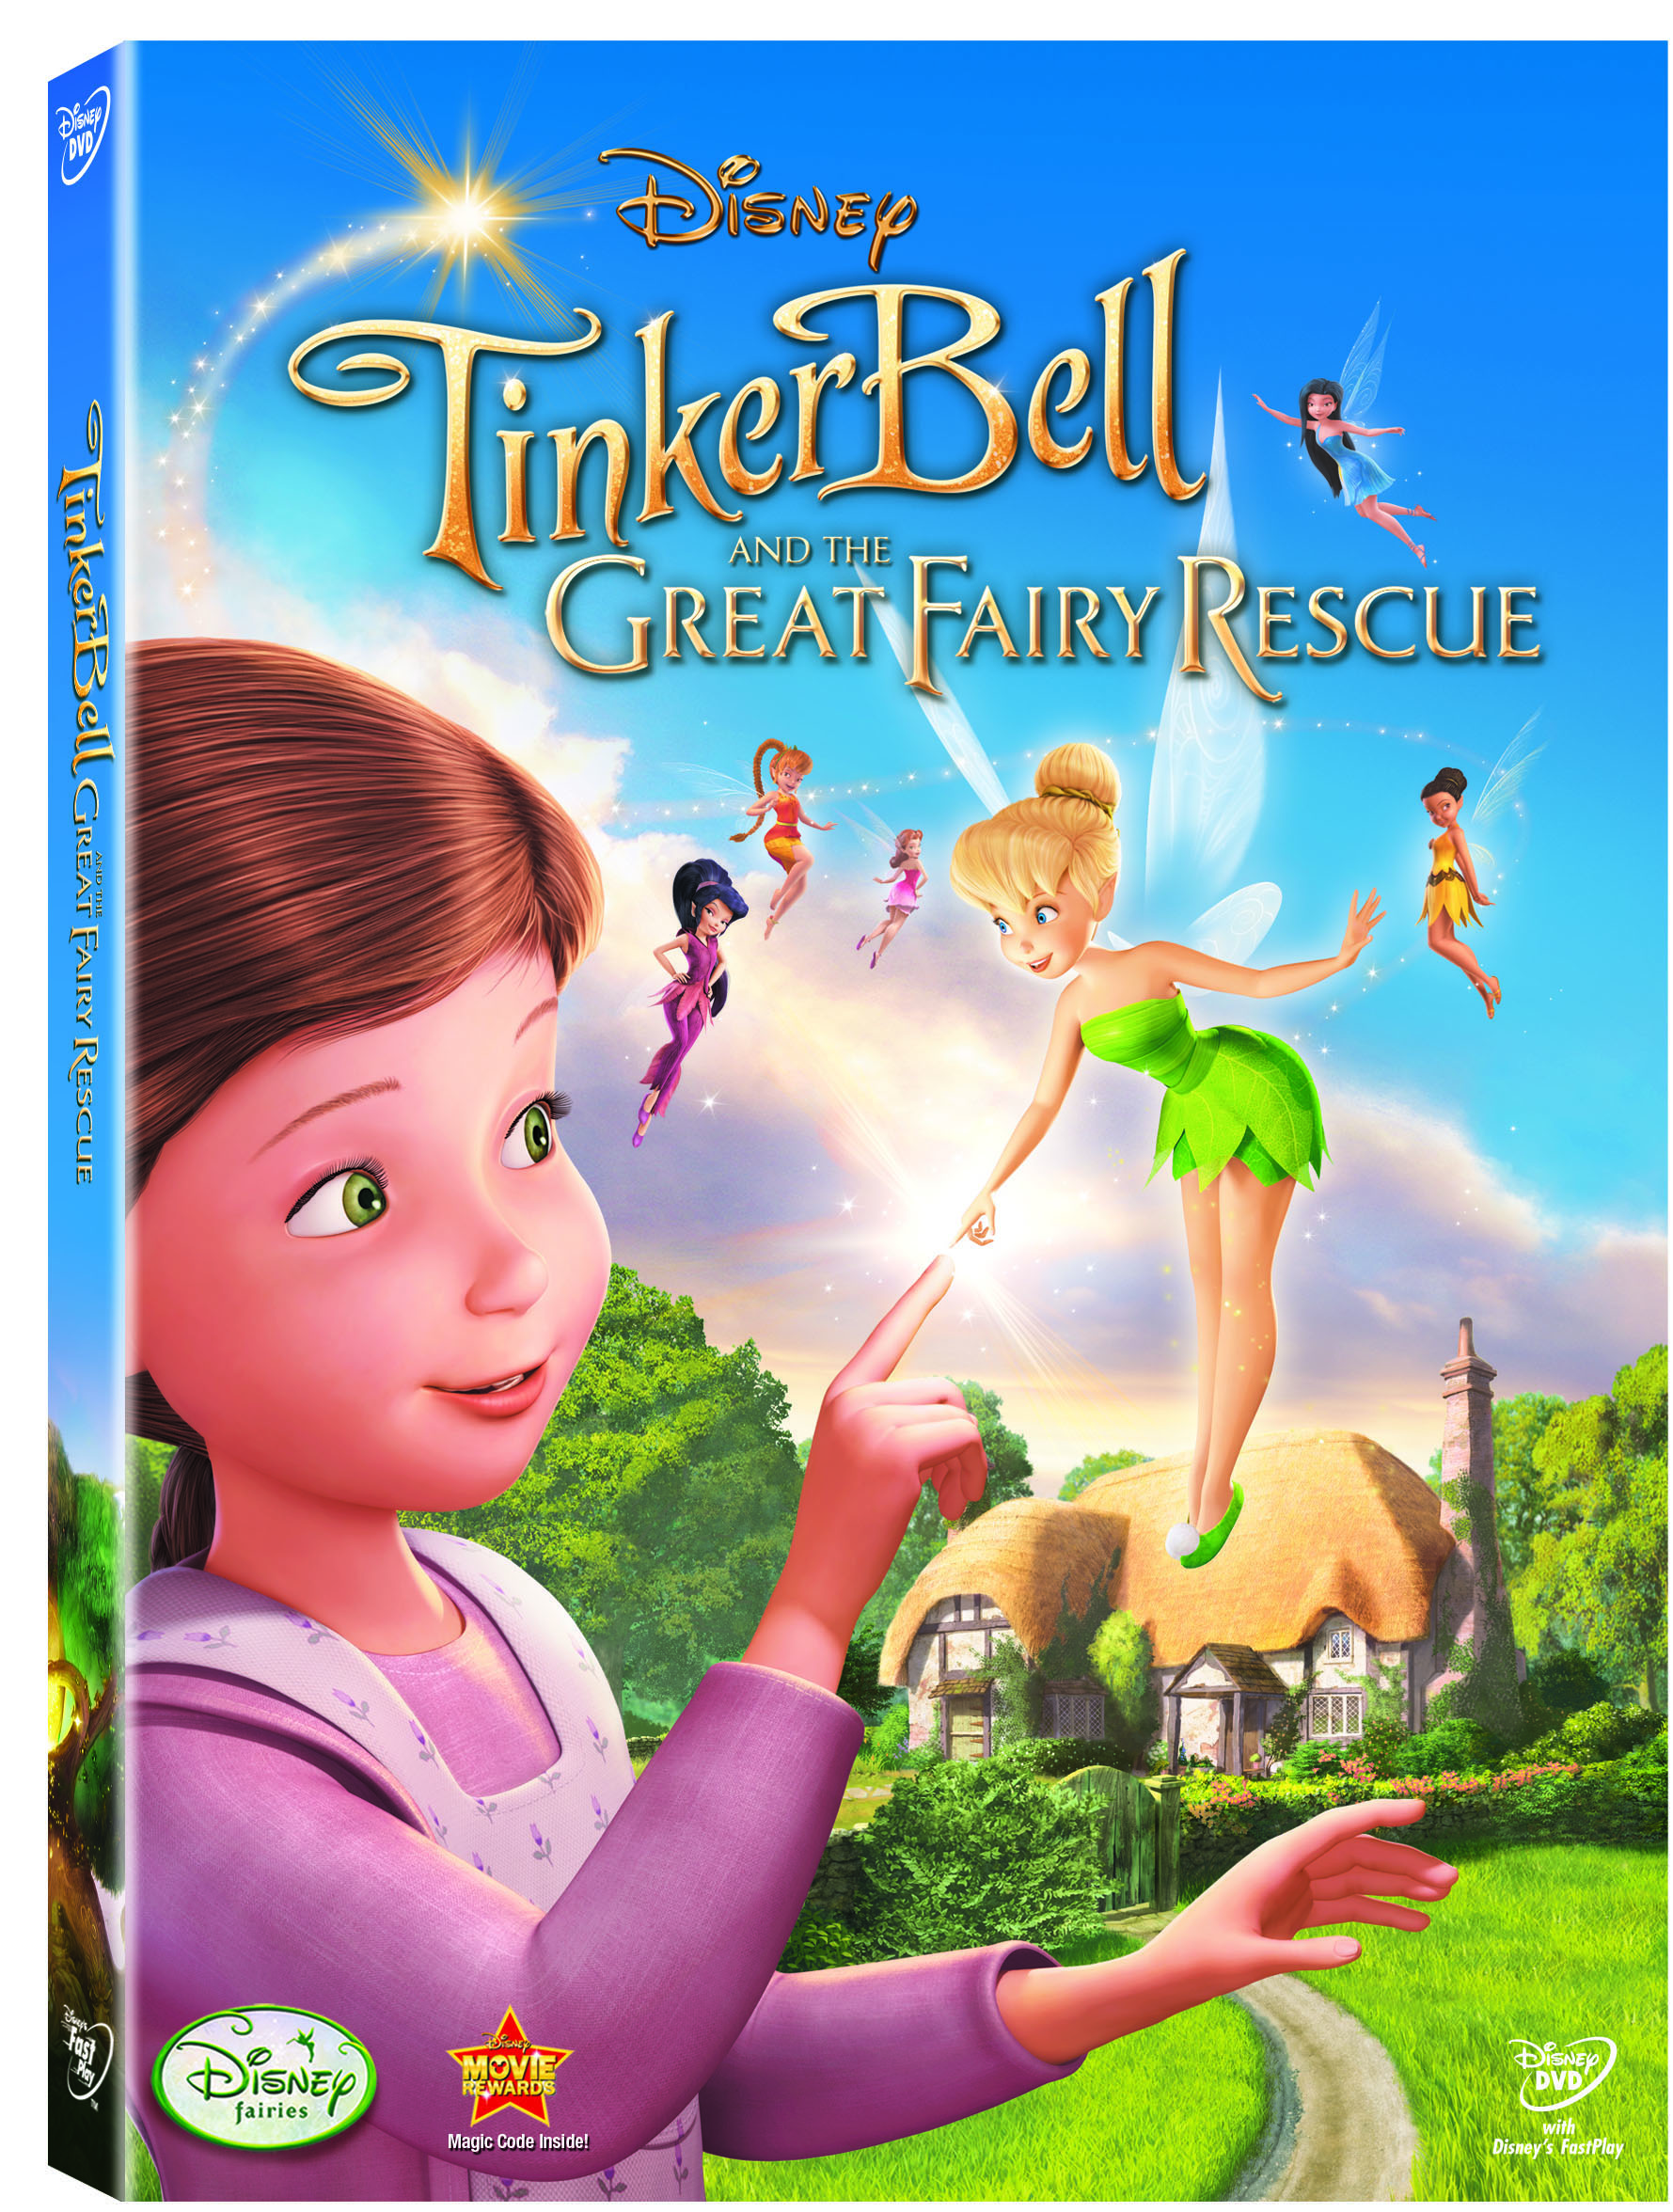 Tinker Bell And The Great Fairy Rescue Backgrounds on Wallpapers Vista